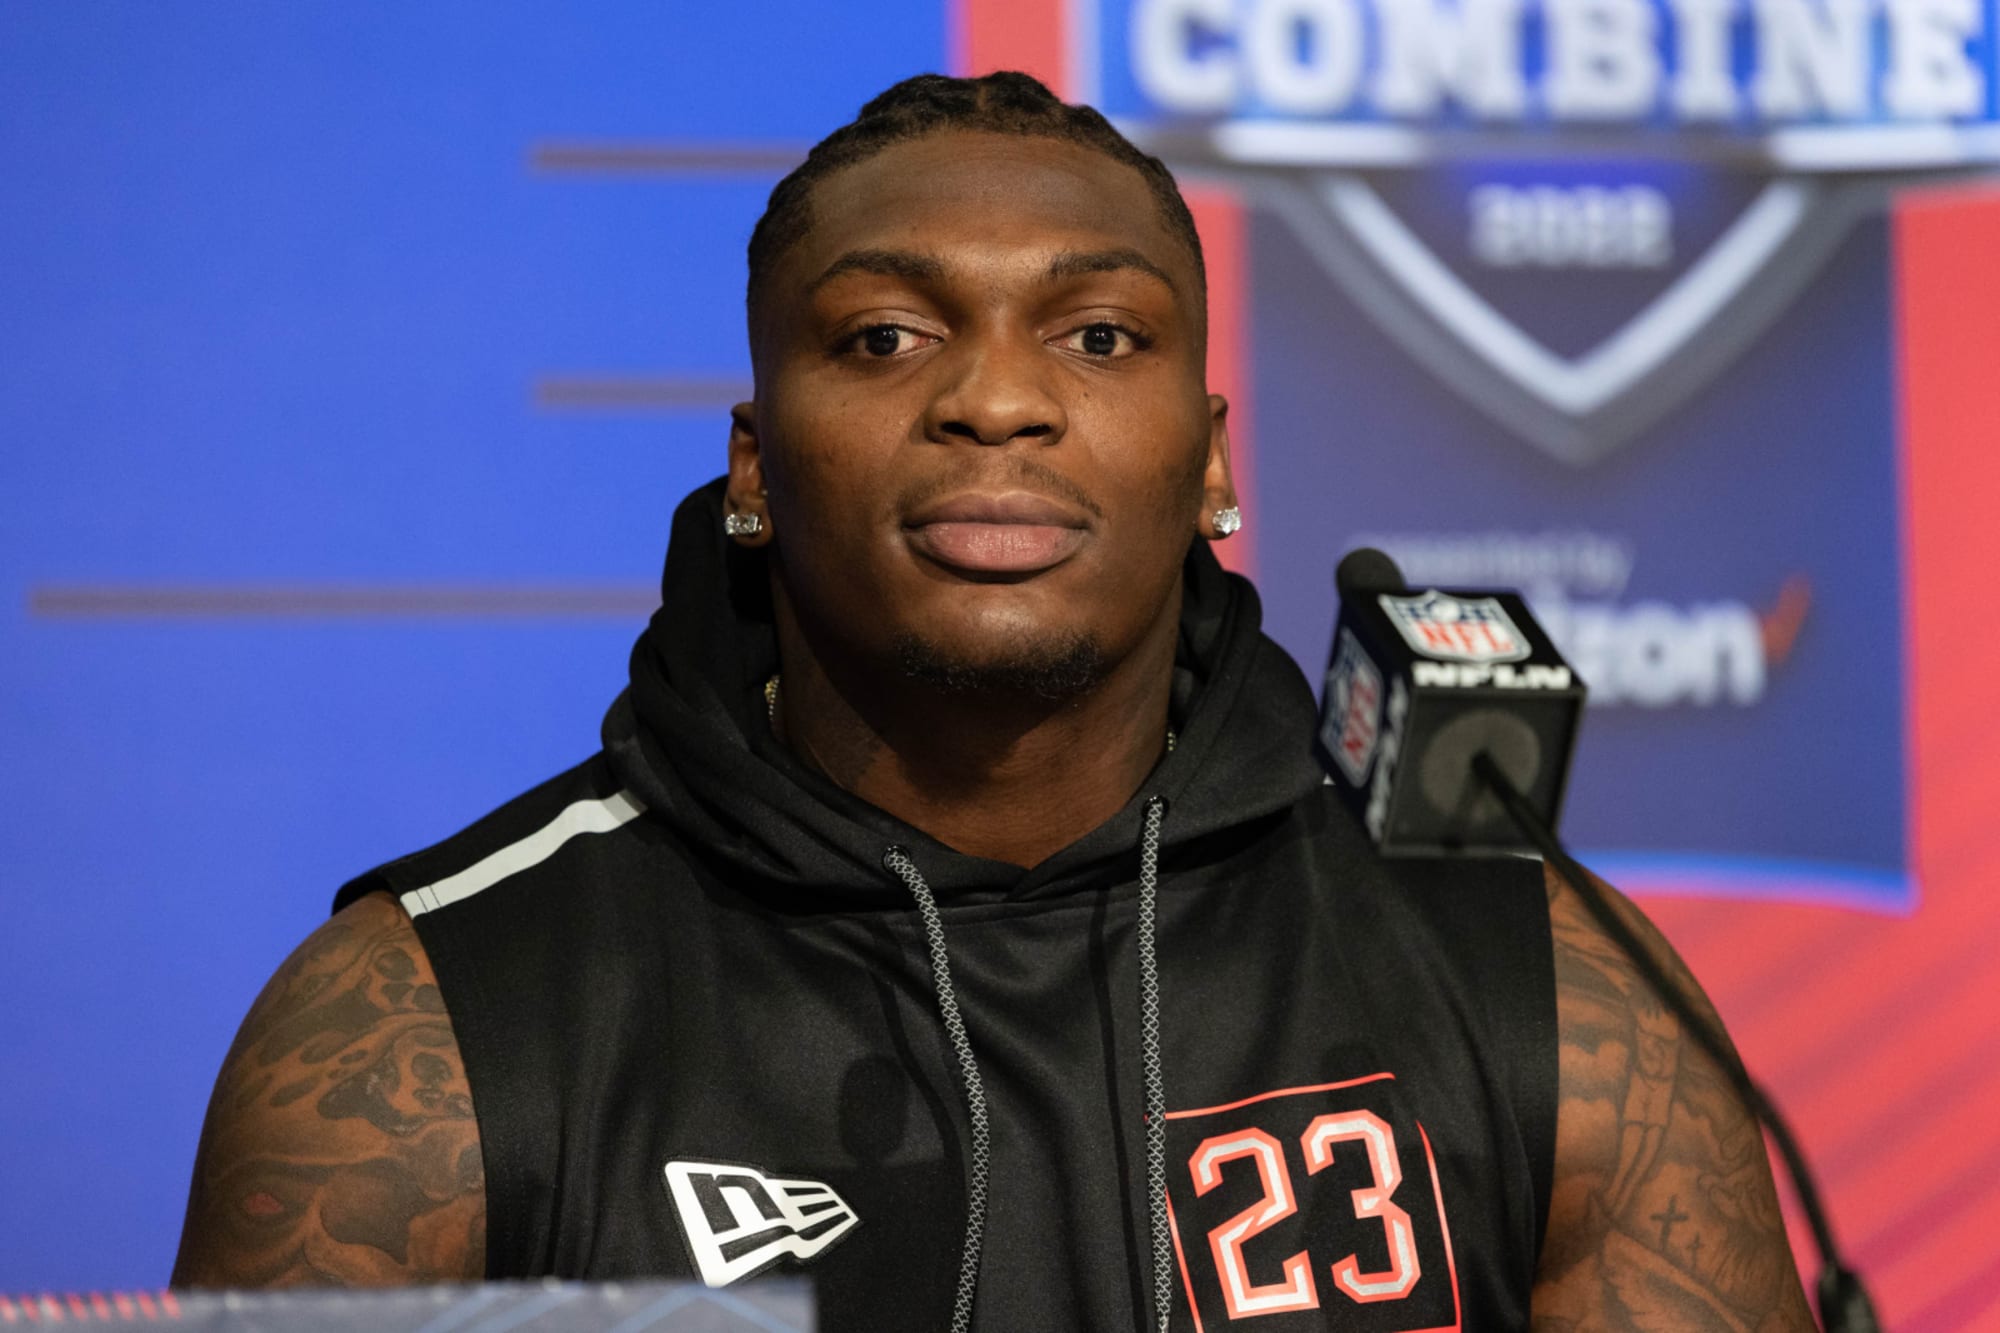 Oklahoma football: Perrion Winfrey grabs scouts' attention at NFL Combine